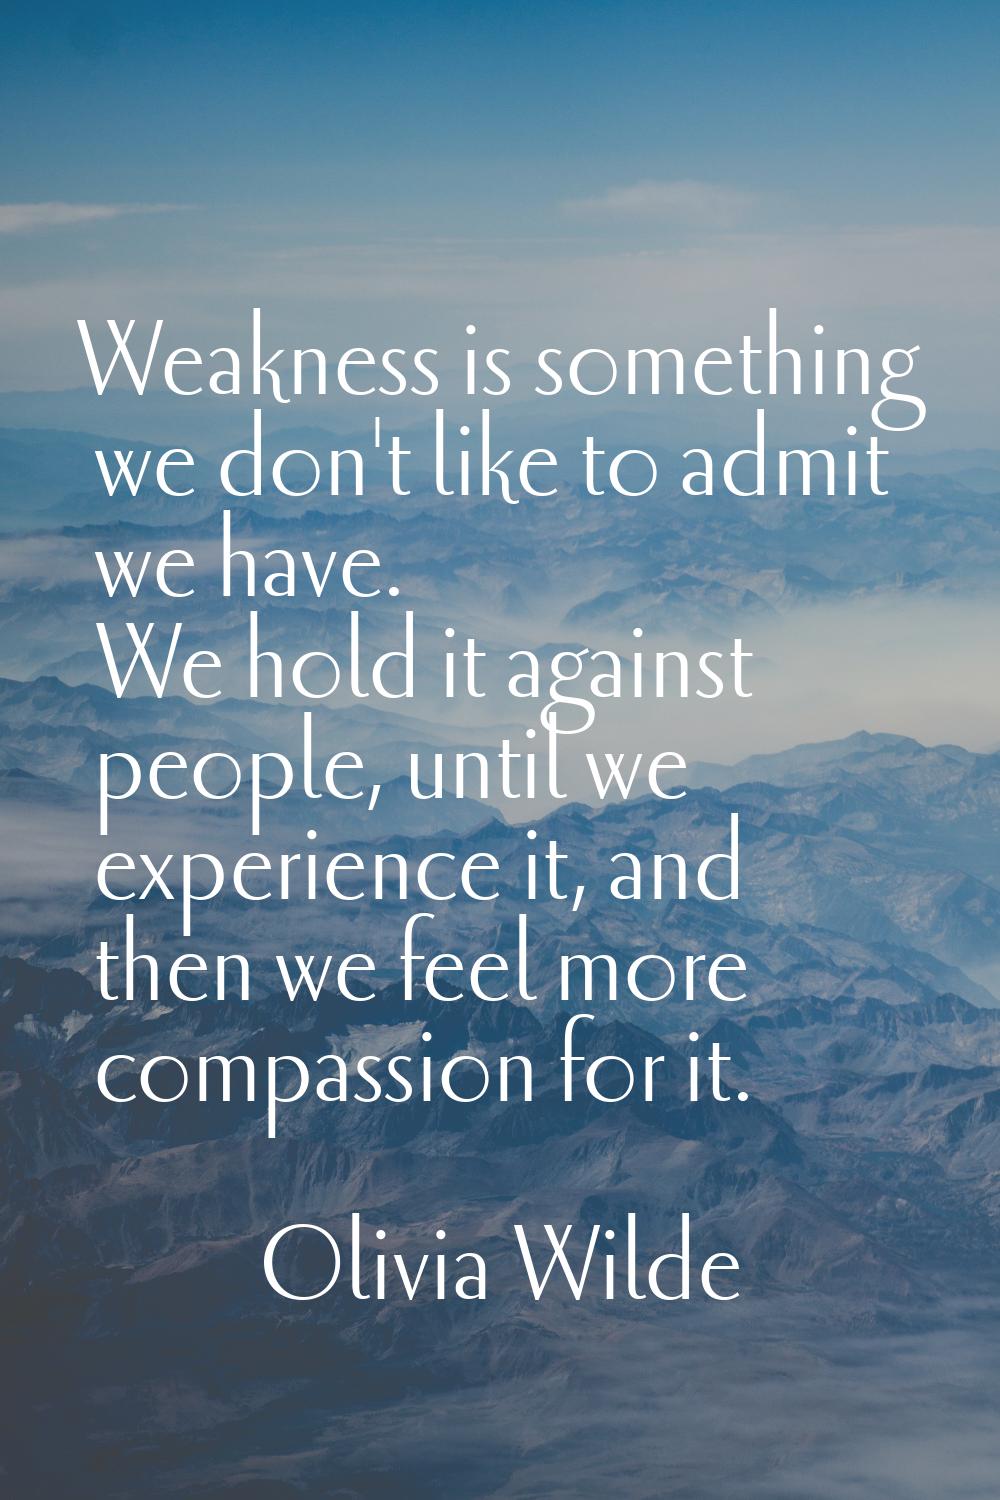 Weakness is something we don't like to admit we have. We hold it against people, until we experienc